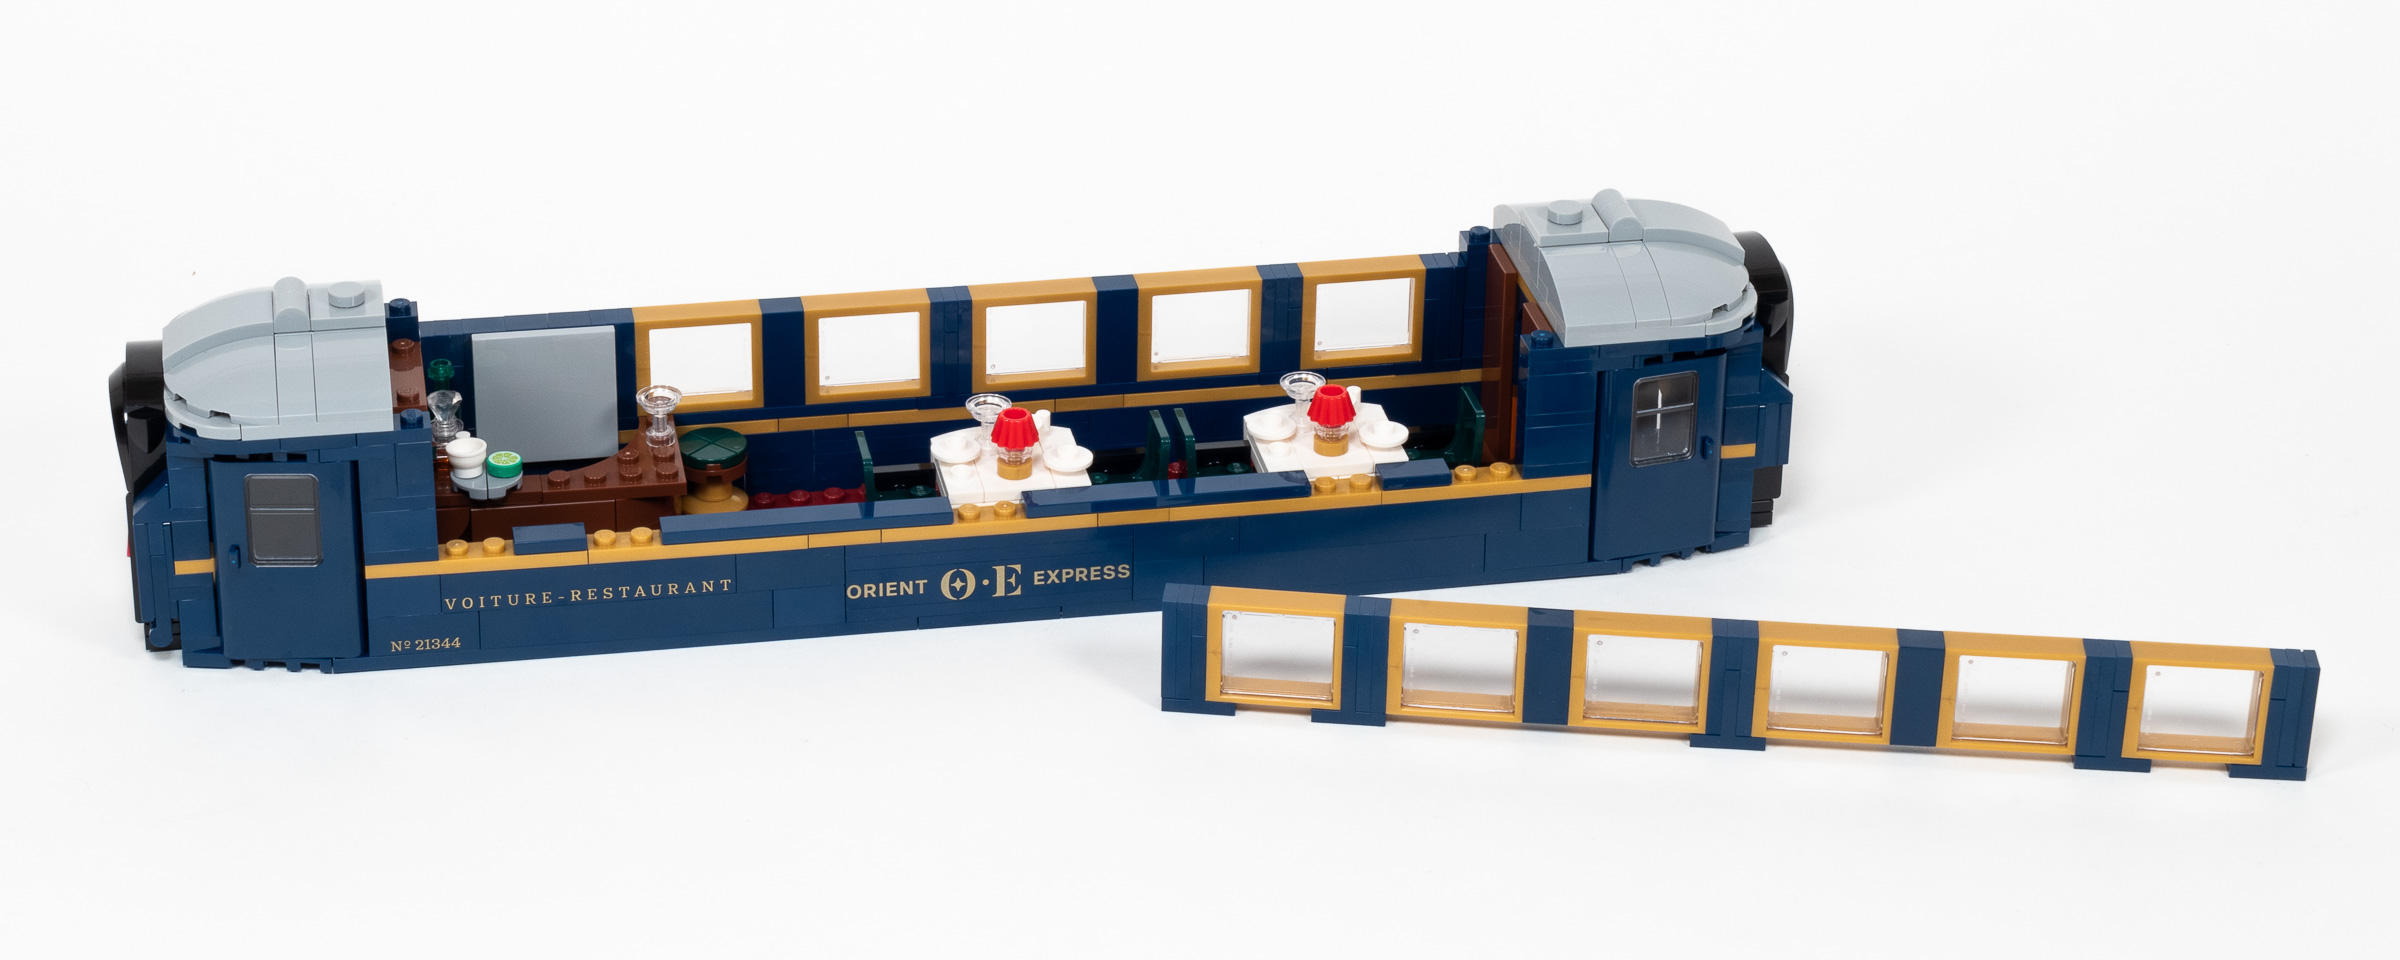 ▻ New LEGO Ideas 21344 The Orient-Express Train: the set is online on the  Shop - HOTH BRICKS